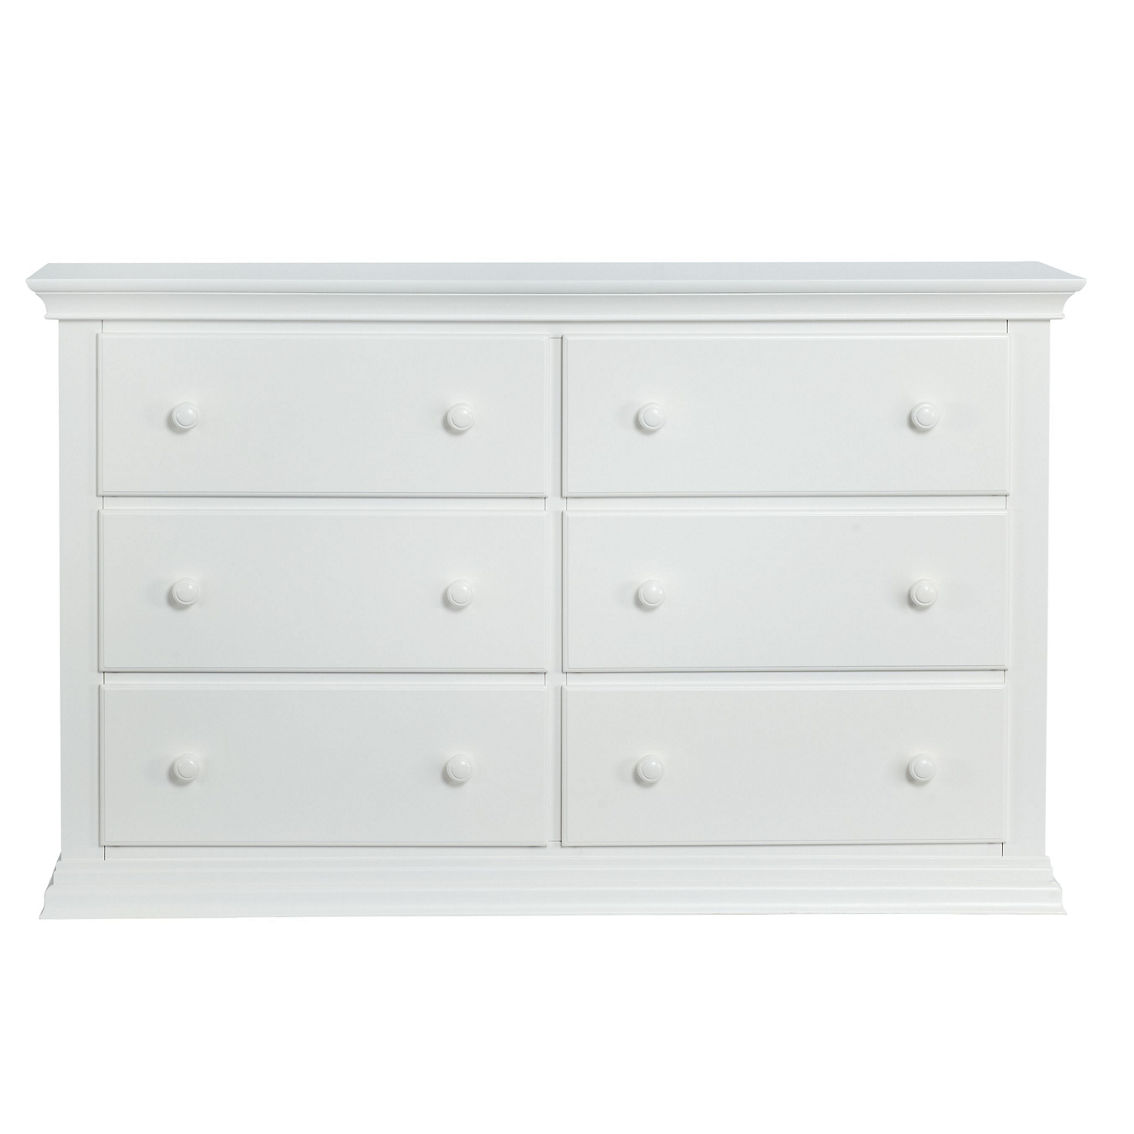 Suite Bebe Connelly Universal 6 Drawer Double Dresser White - Image 2 of 5